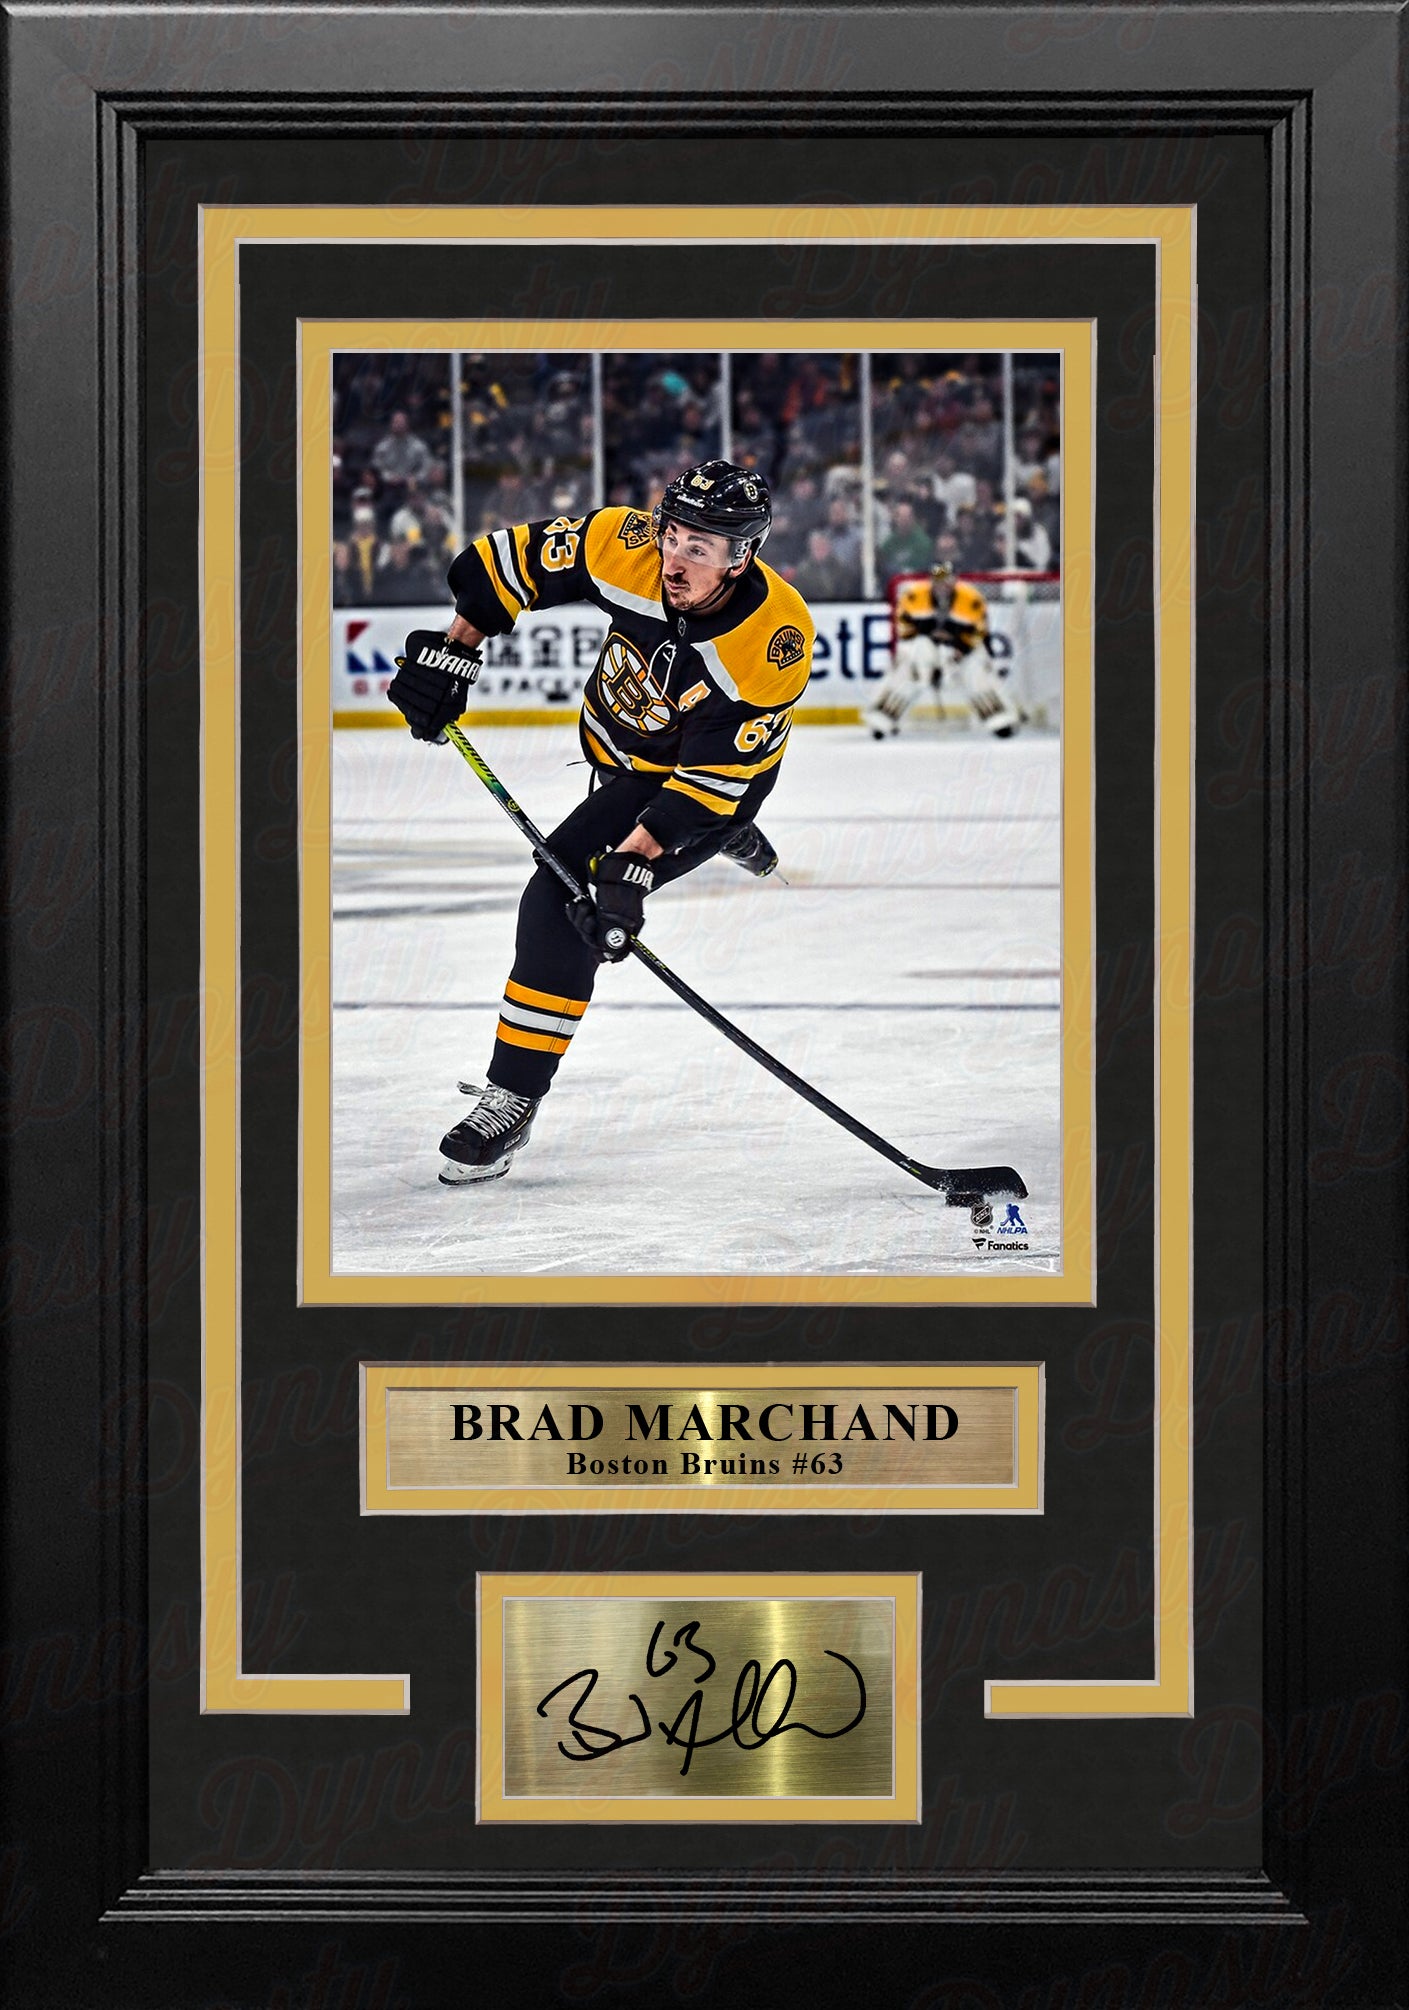 Brad Marchand Boston Bruins Signed 8x10 Photo Red Sox Fenway Park